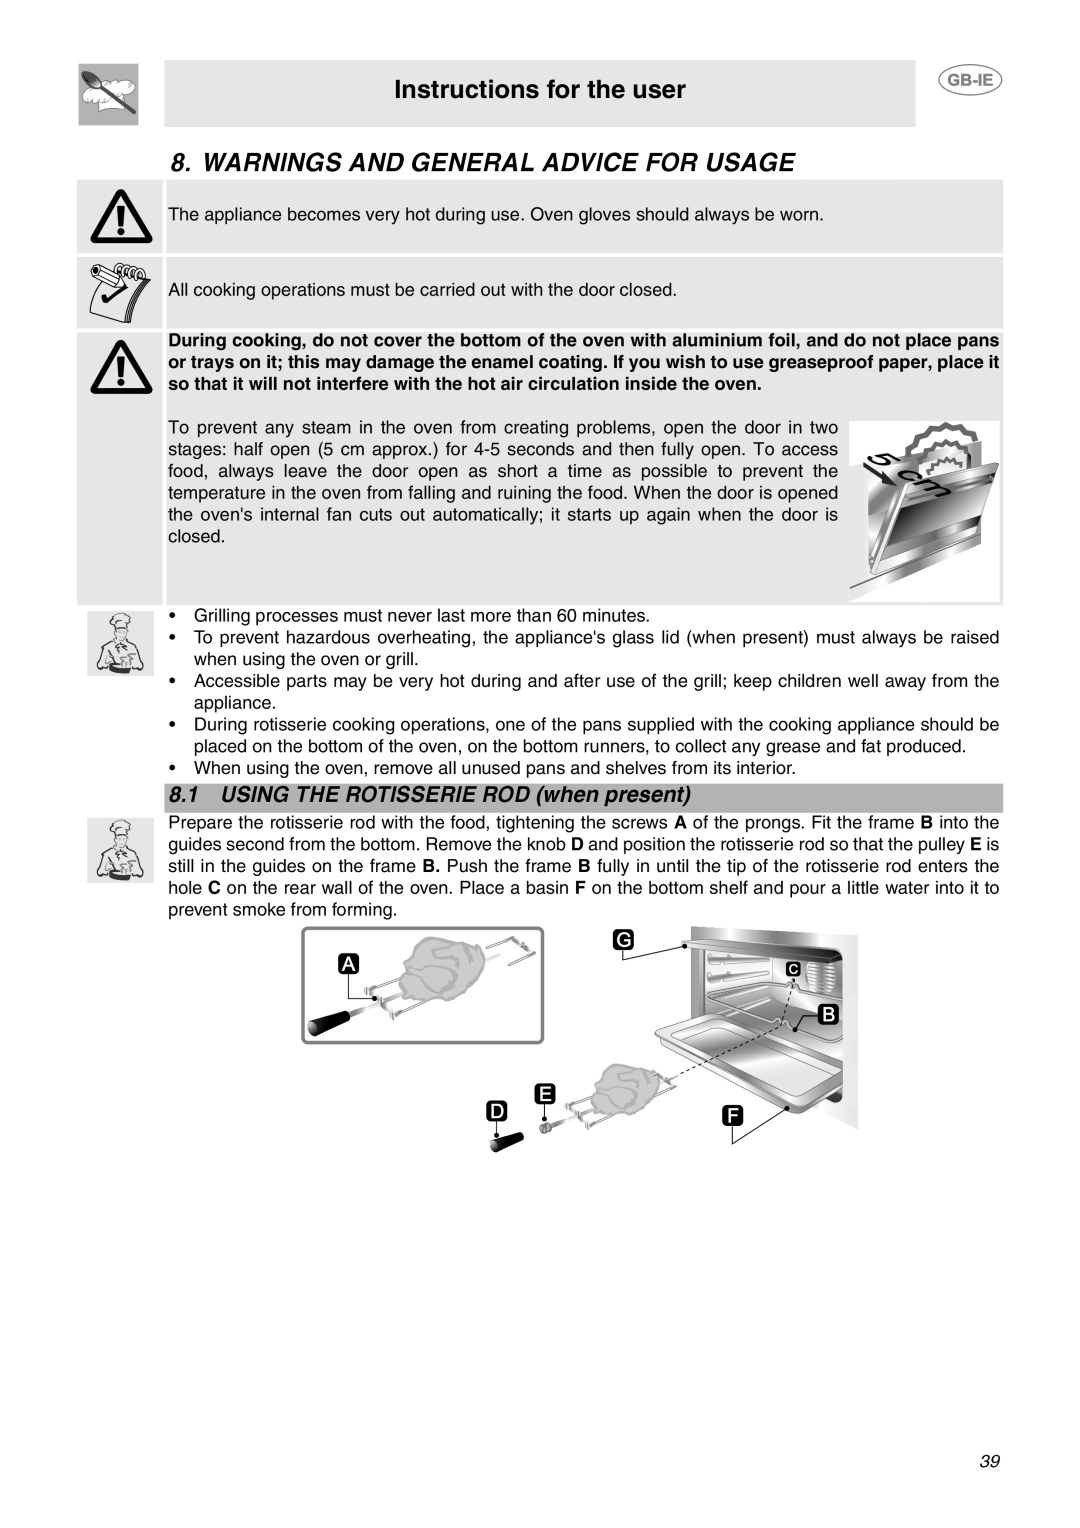 Smeg CE92IPX manual Warnings And General Advice For Usage, USING THE ROTISSERIE ROD when present, Instructions for the user 